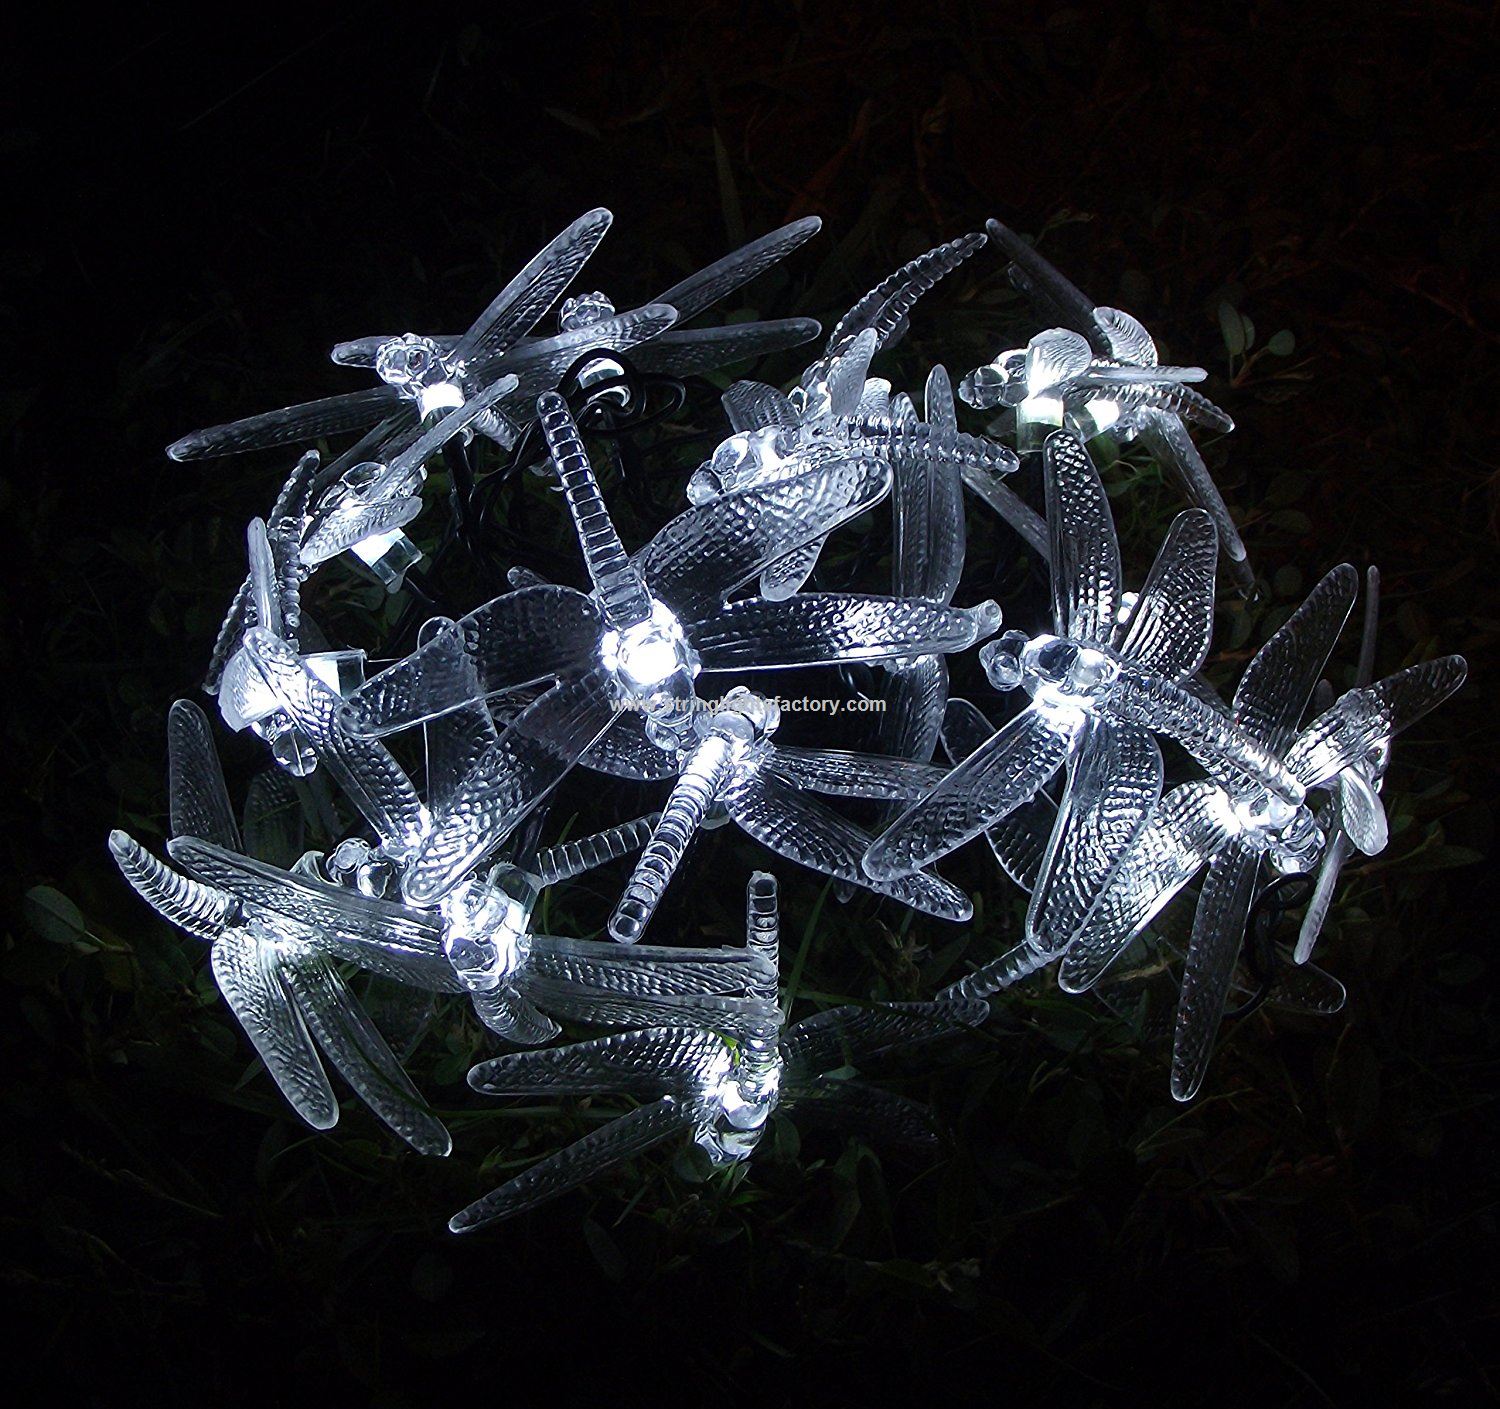 Outdoor Solar Powered String Lights 5M 20 LED Dragonfly Shape Fairy String Lights